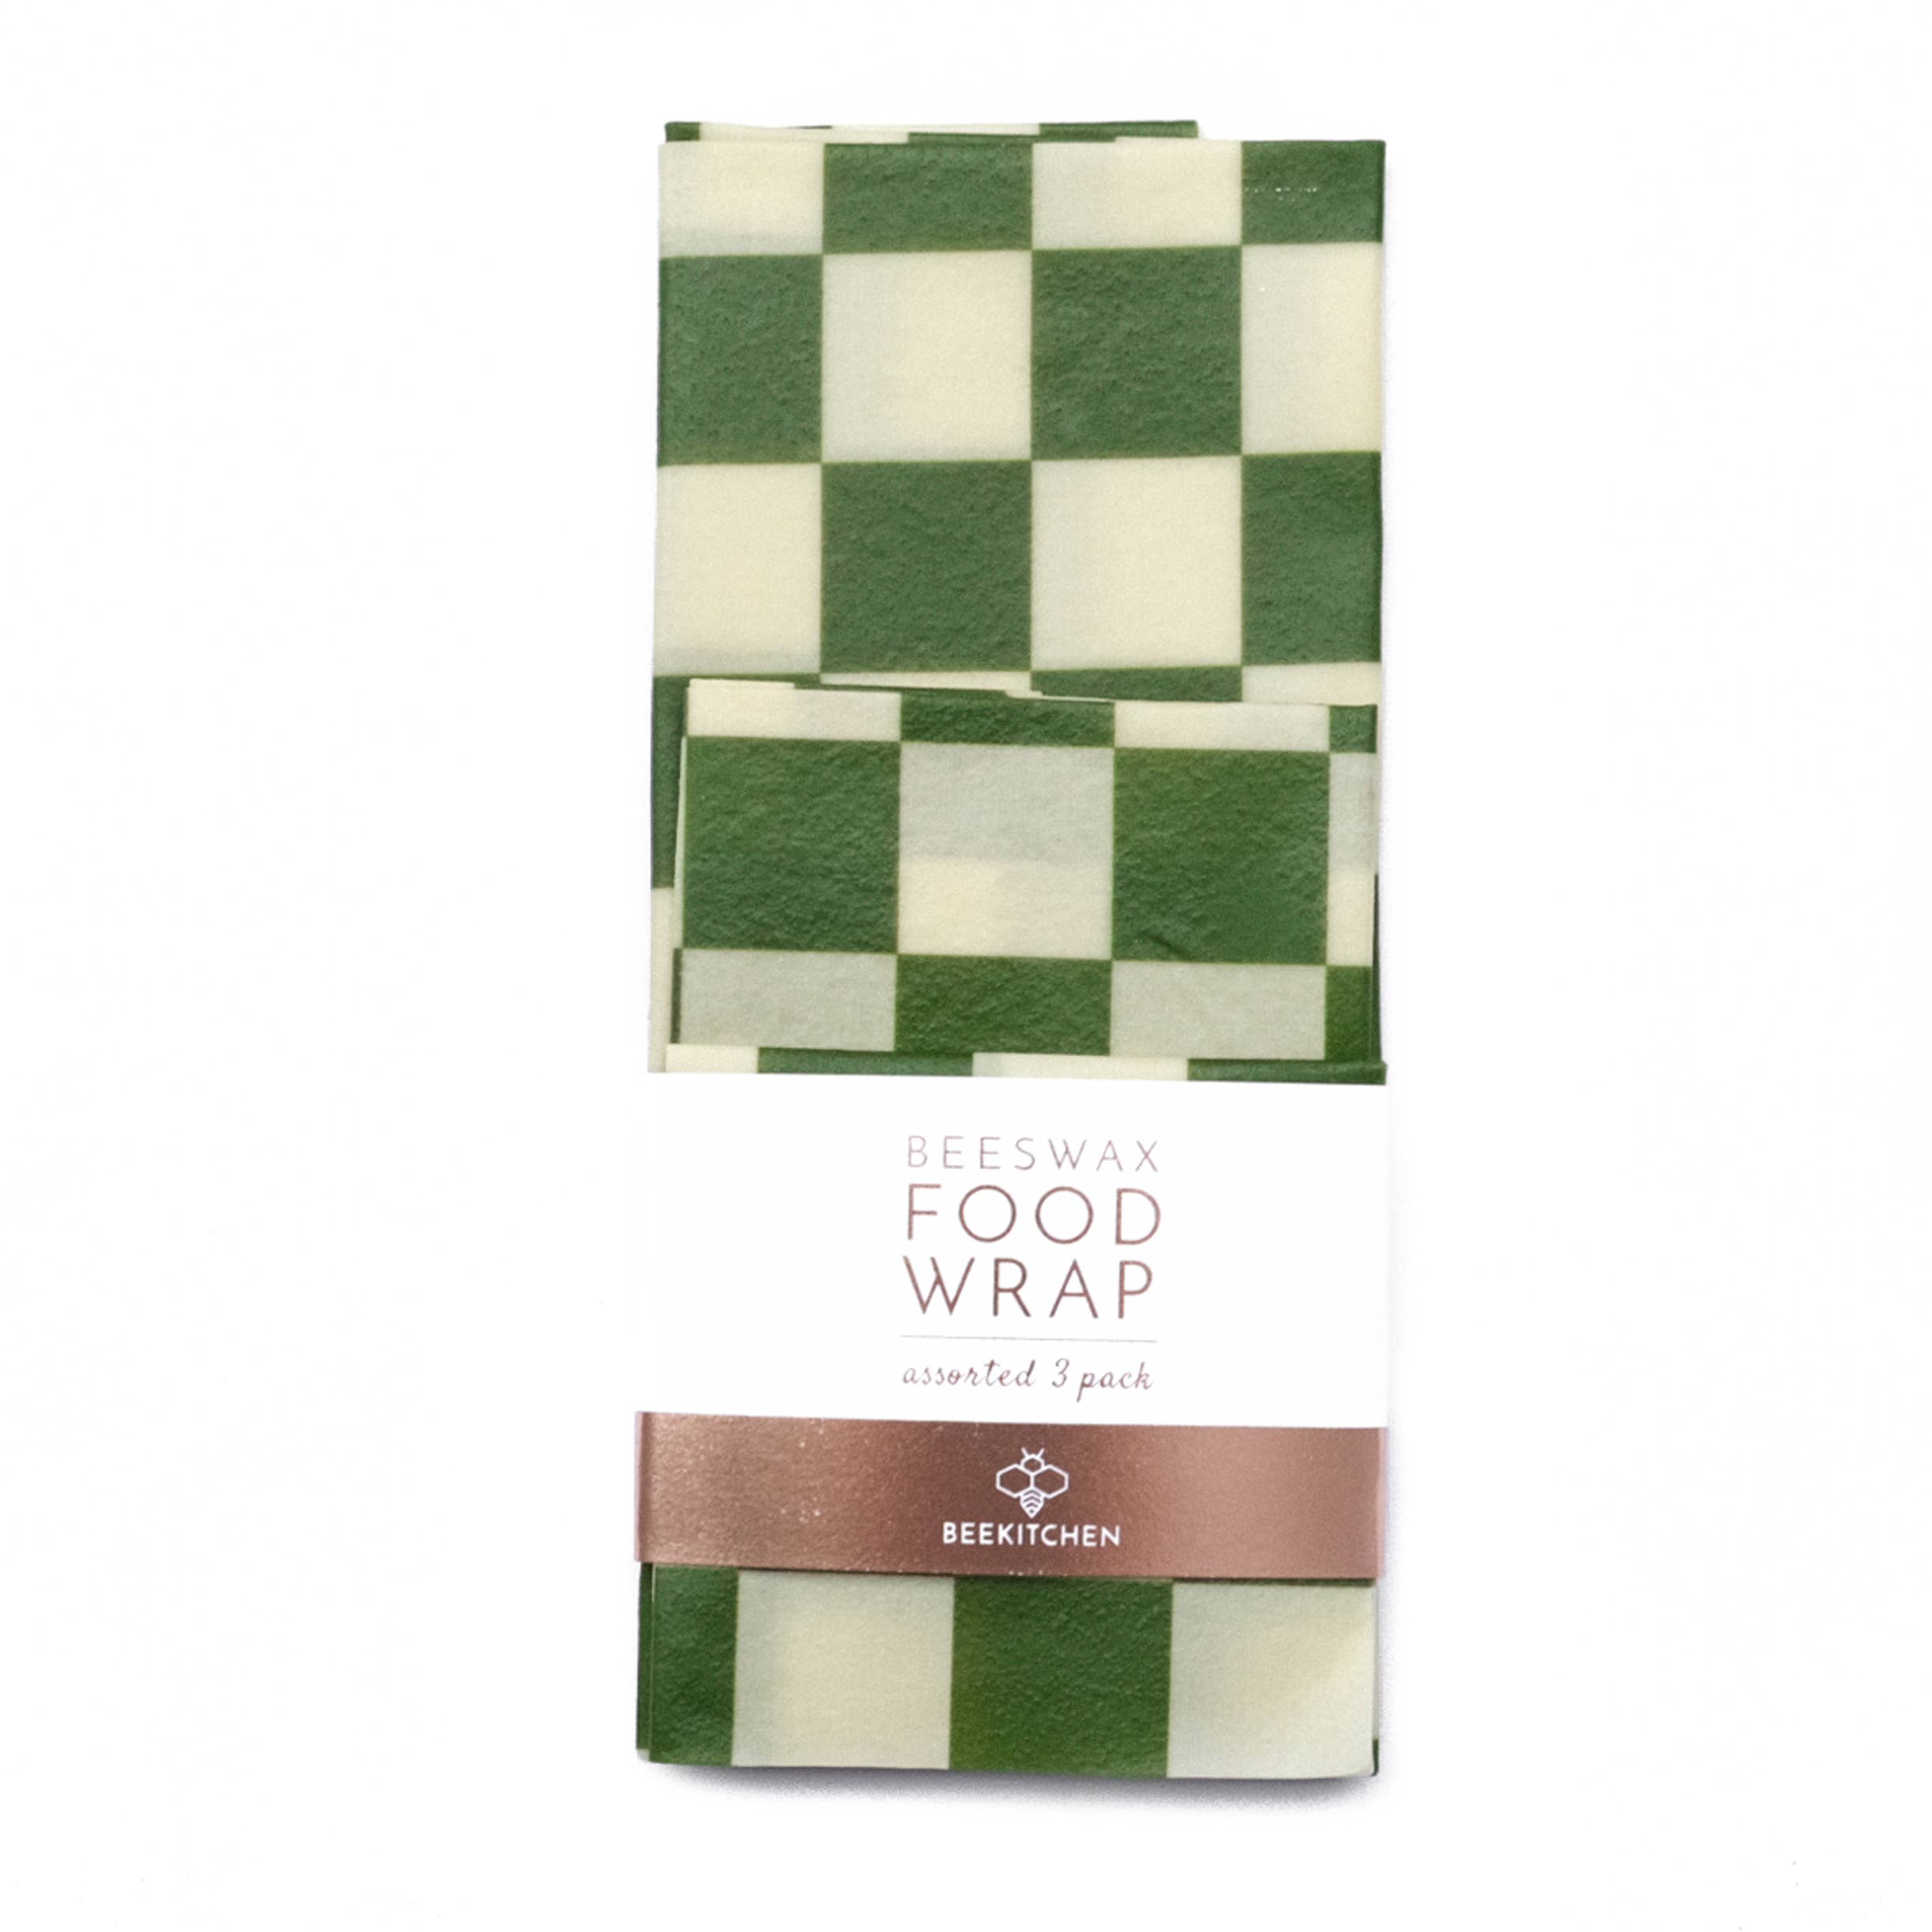 (3 Pack) Beeswax Food Wrap Green Checkers